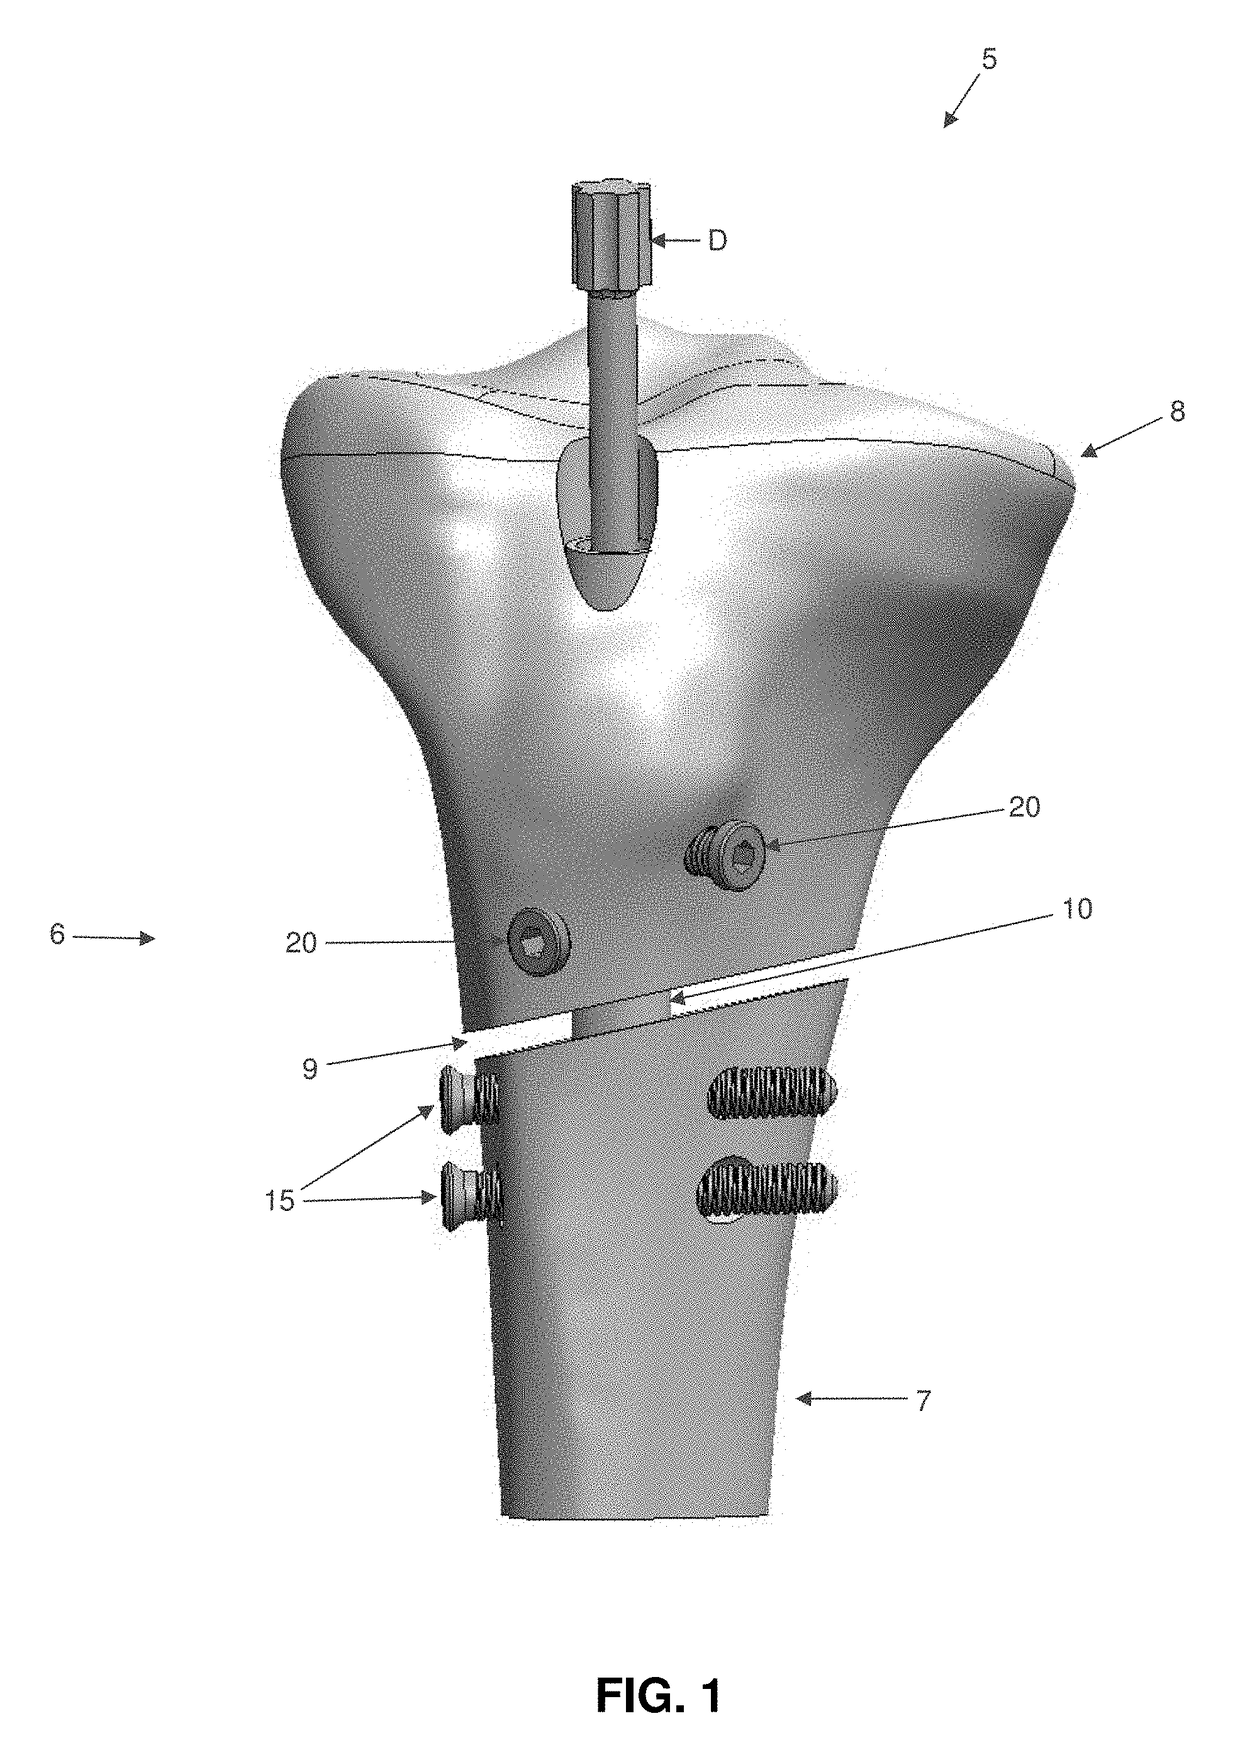 Interlocking intramedullary rod assembly for treating proximal tibial fractures